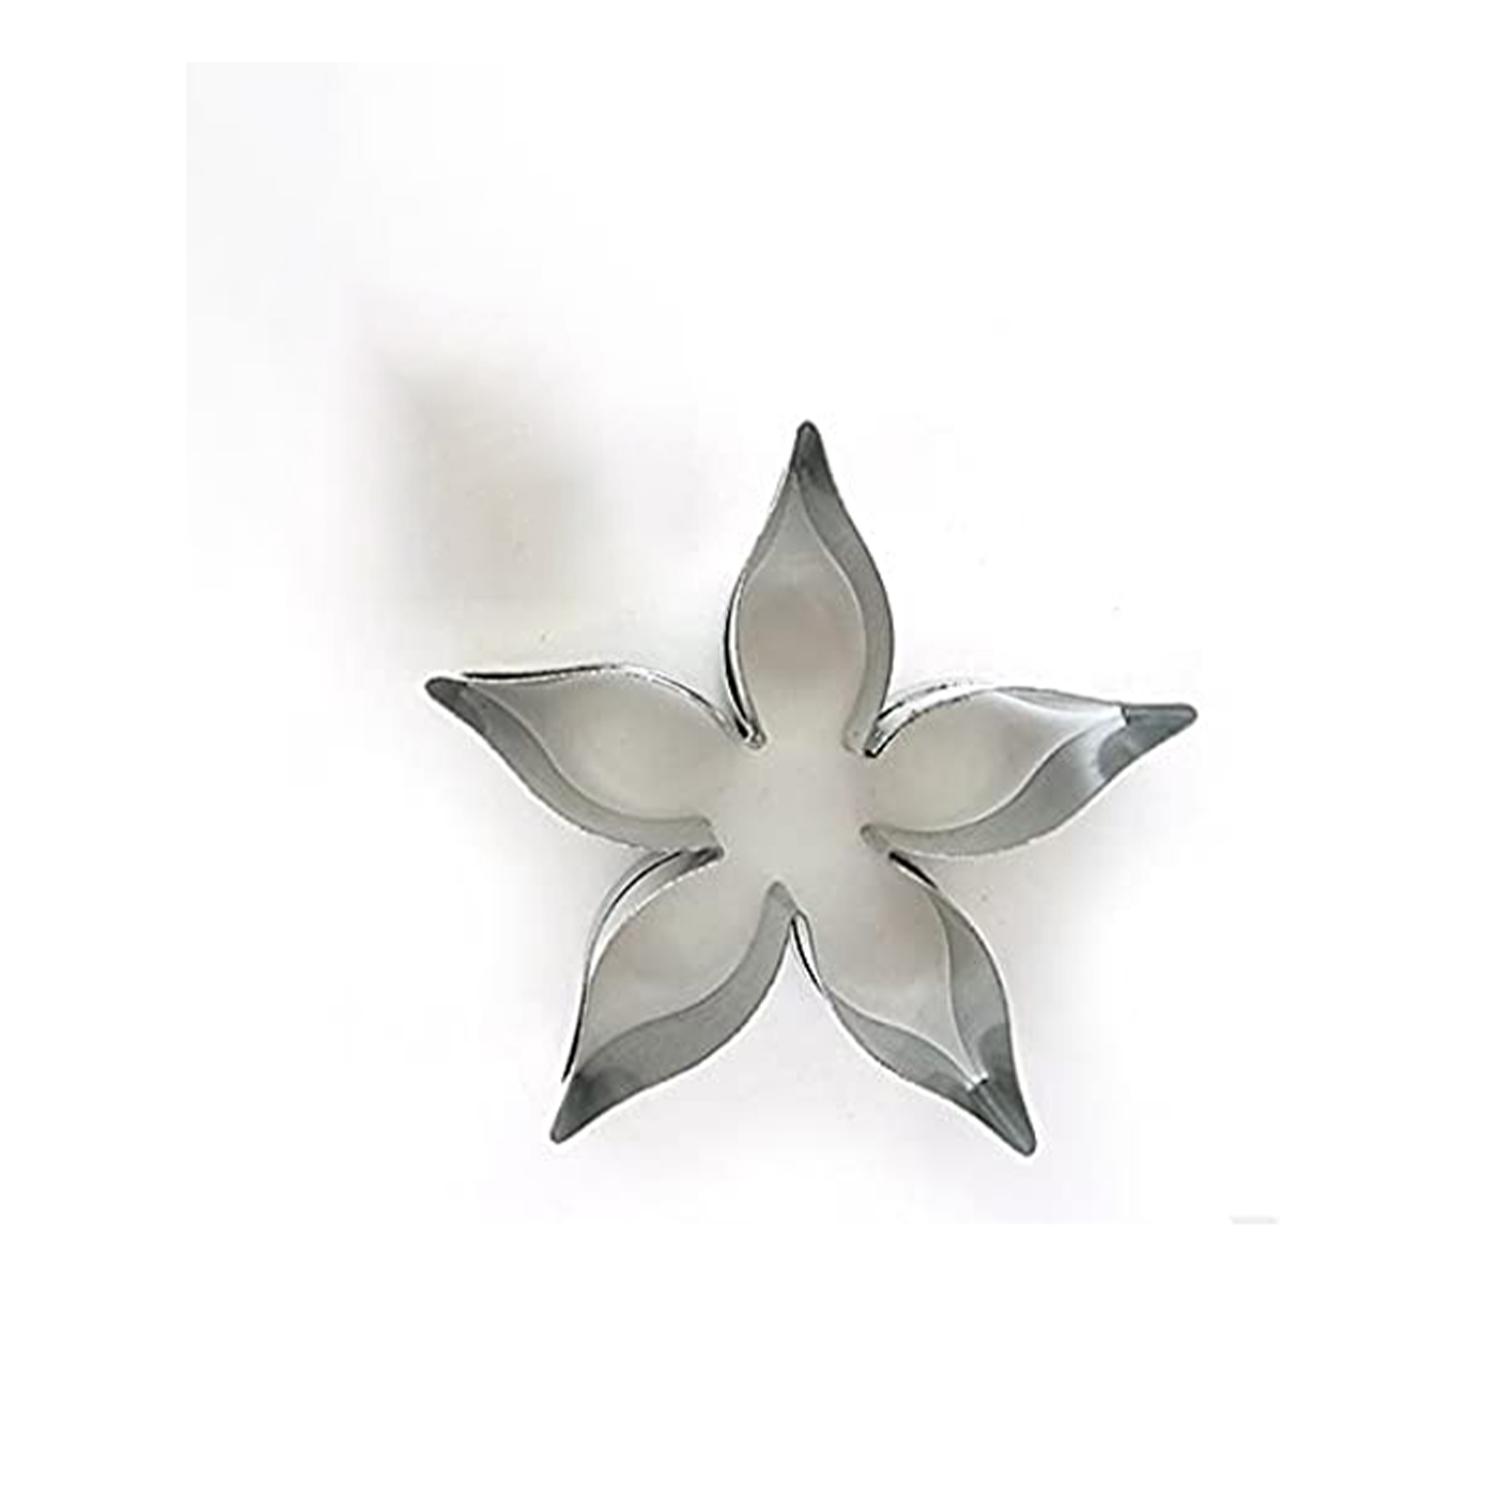 1PC STAINLESS STEEL FLOWER SEPAL CALYX CUTTER